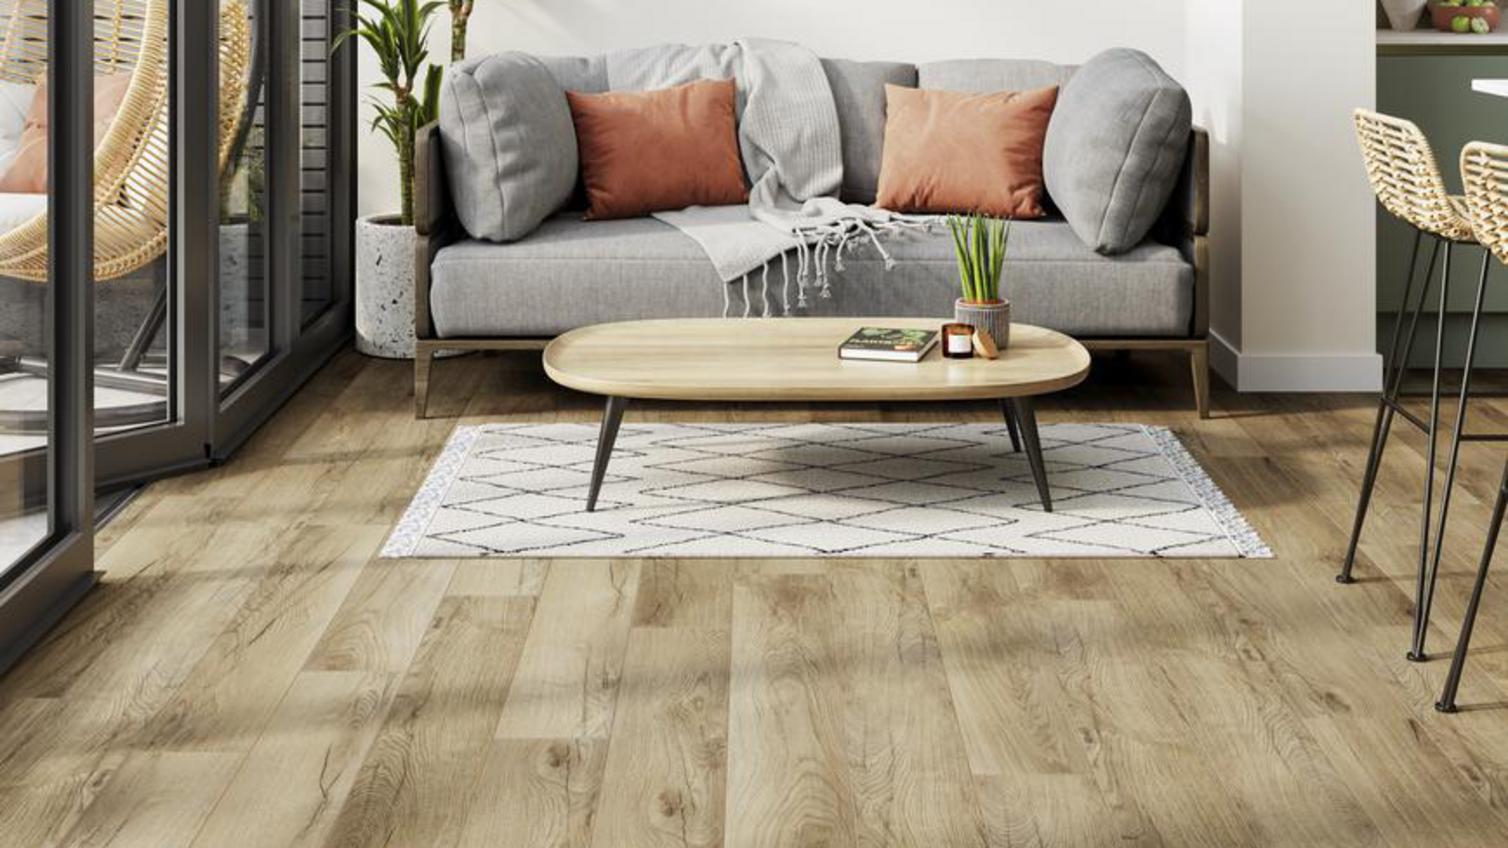 Plank flooring in a modern living and dining room